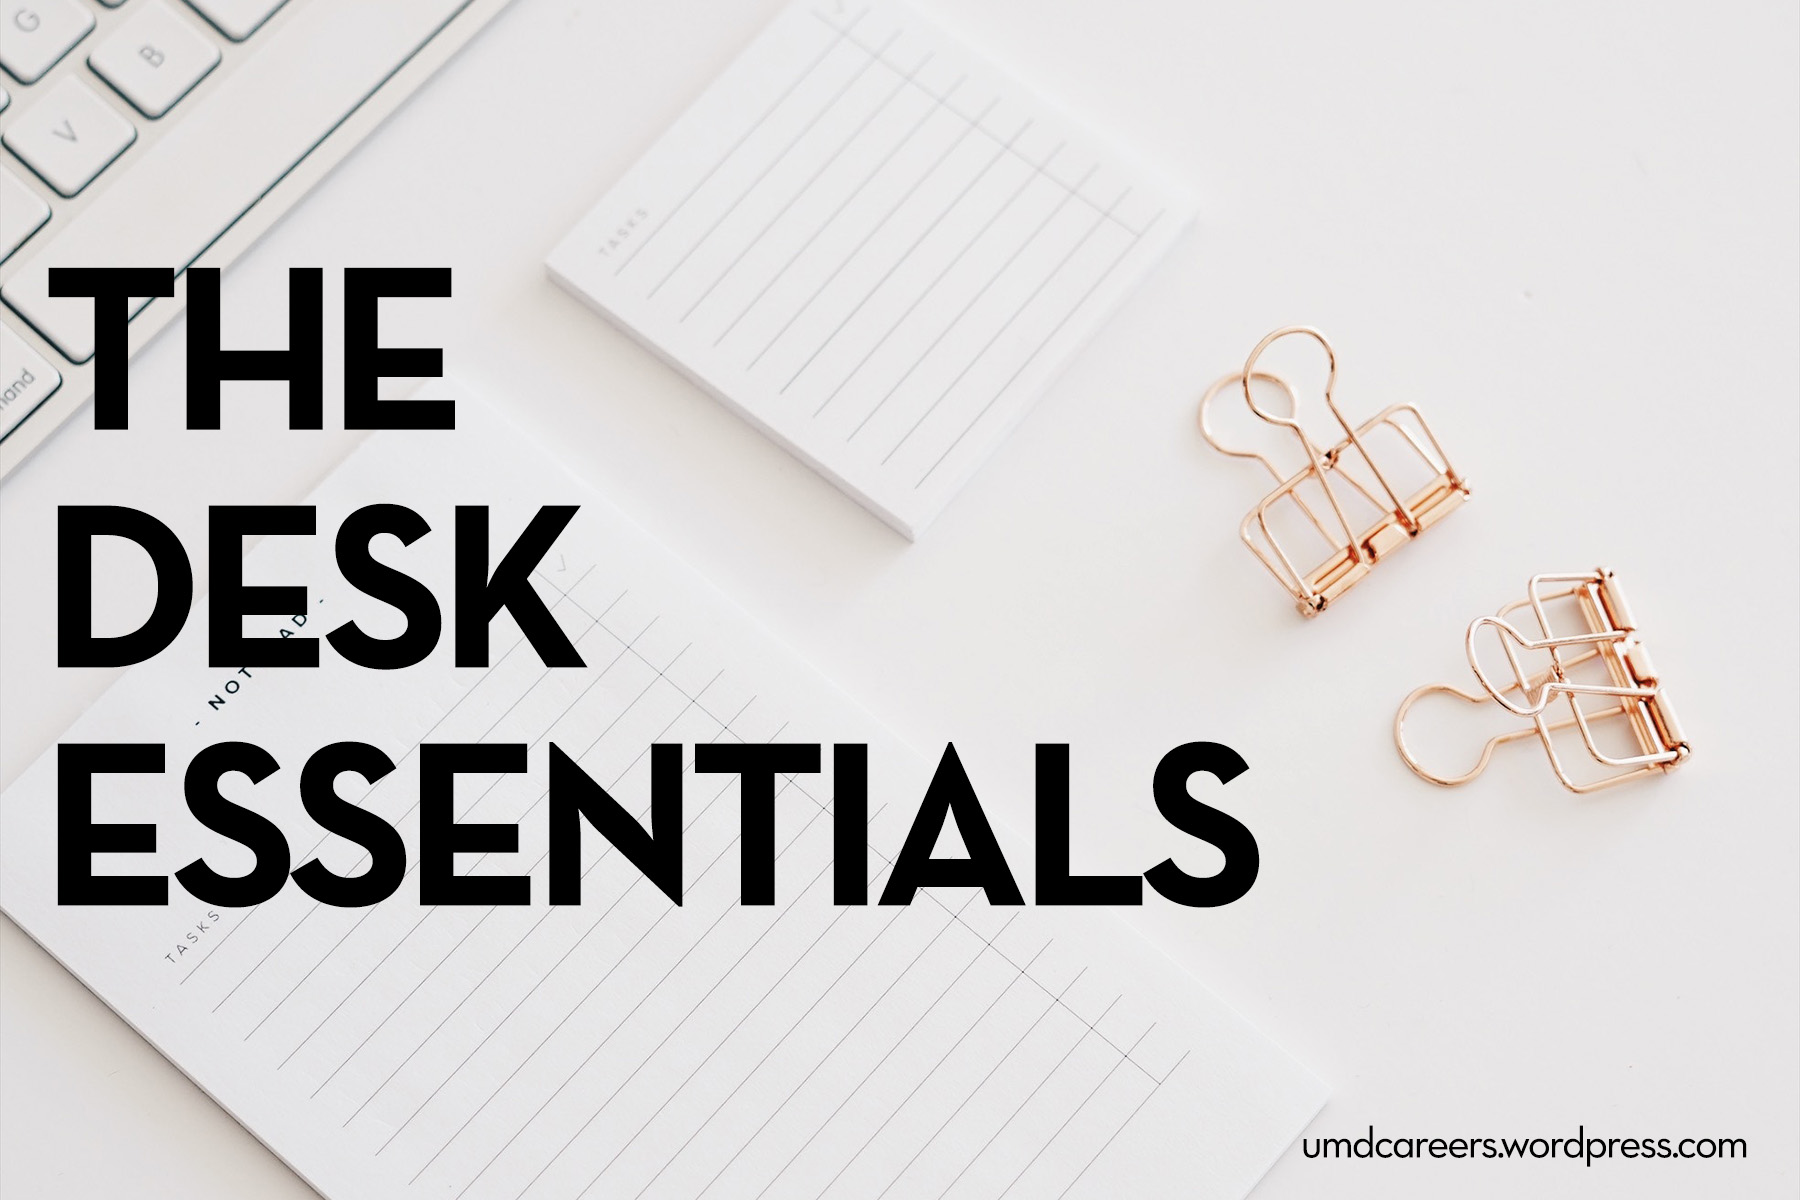 Image: white notepads and gold binder clips on white desk
Text: The desk essentials